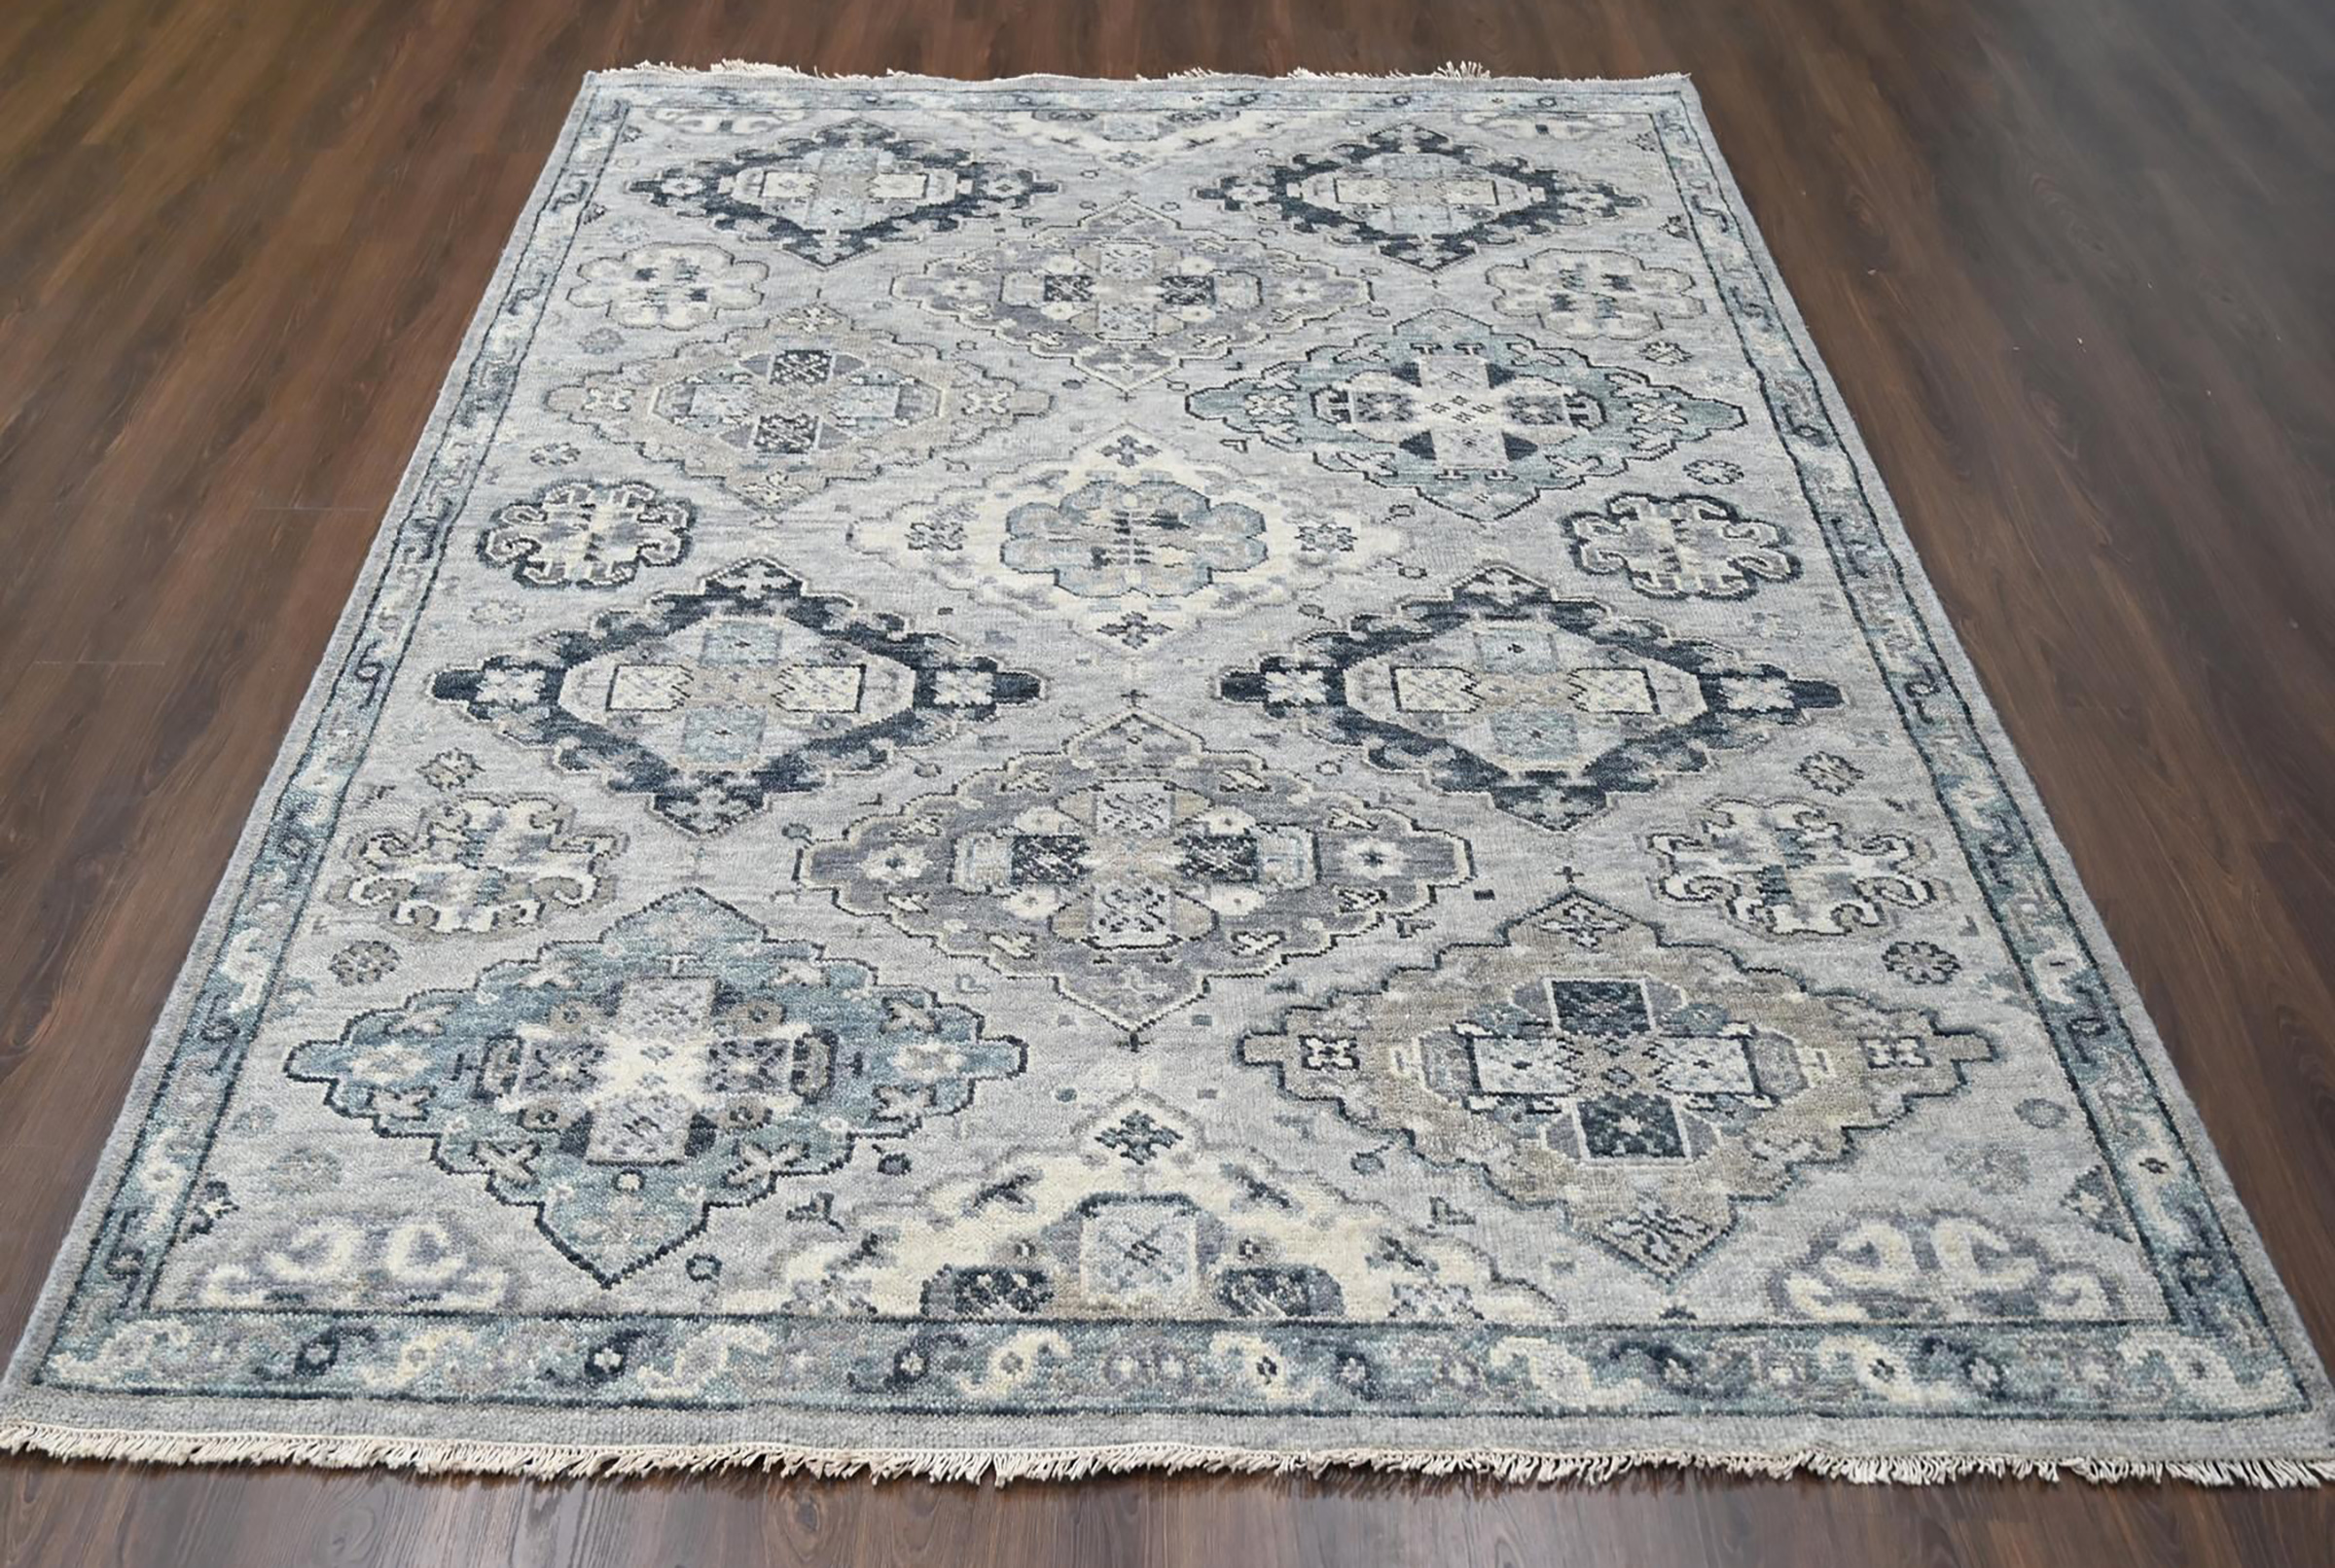 Silver Gray Hand Knotted Wool Anatolian Design Oriental Carpet